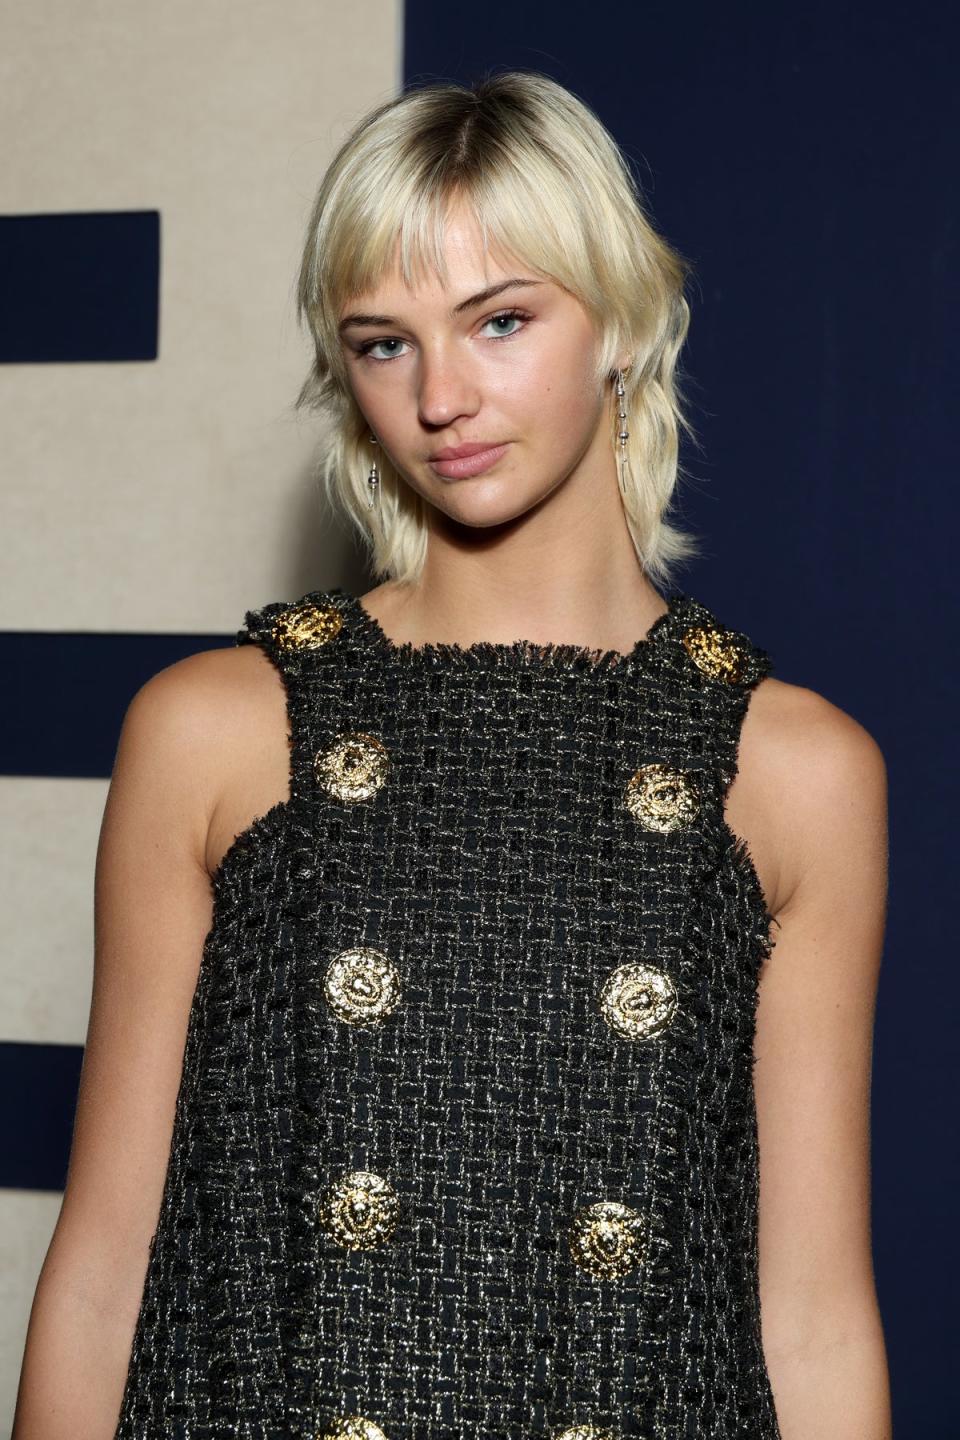 Harriet Muldoon client Mia Regan has a chic mixie cut and Barbie fringe (Pascal Le Segretain / Getty Images for Balmain)